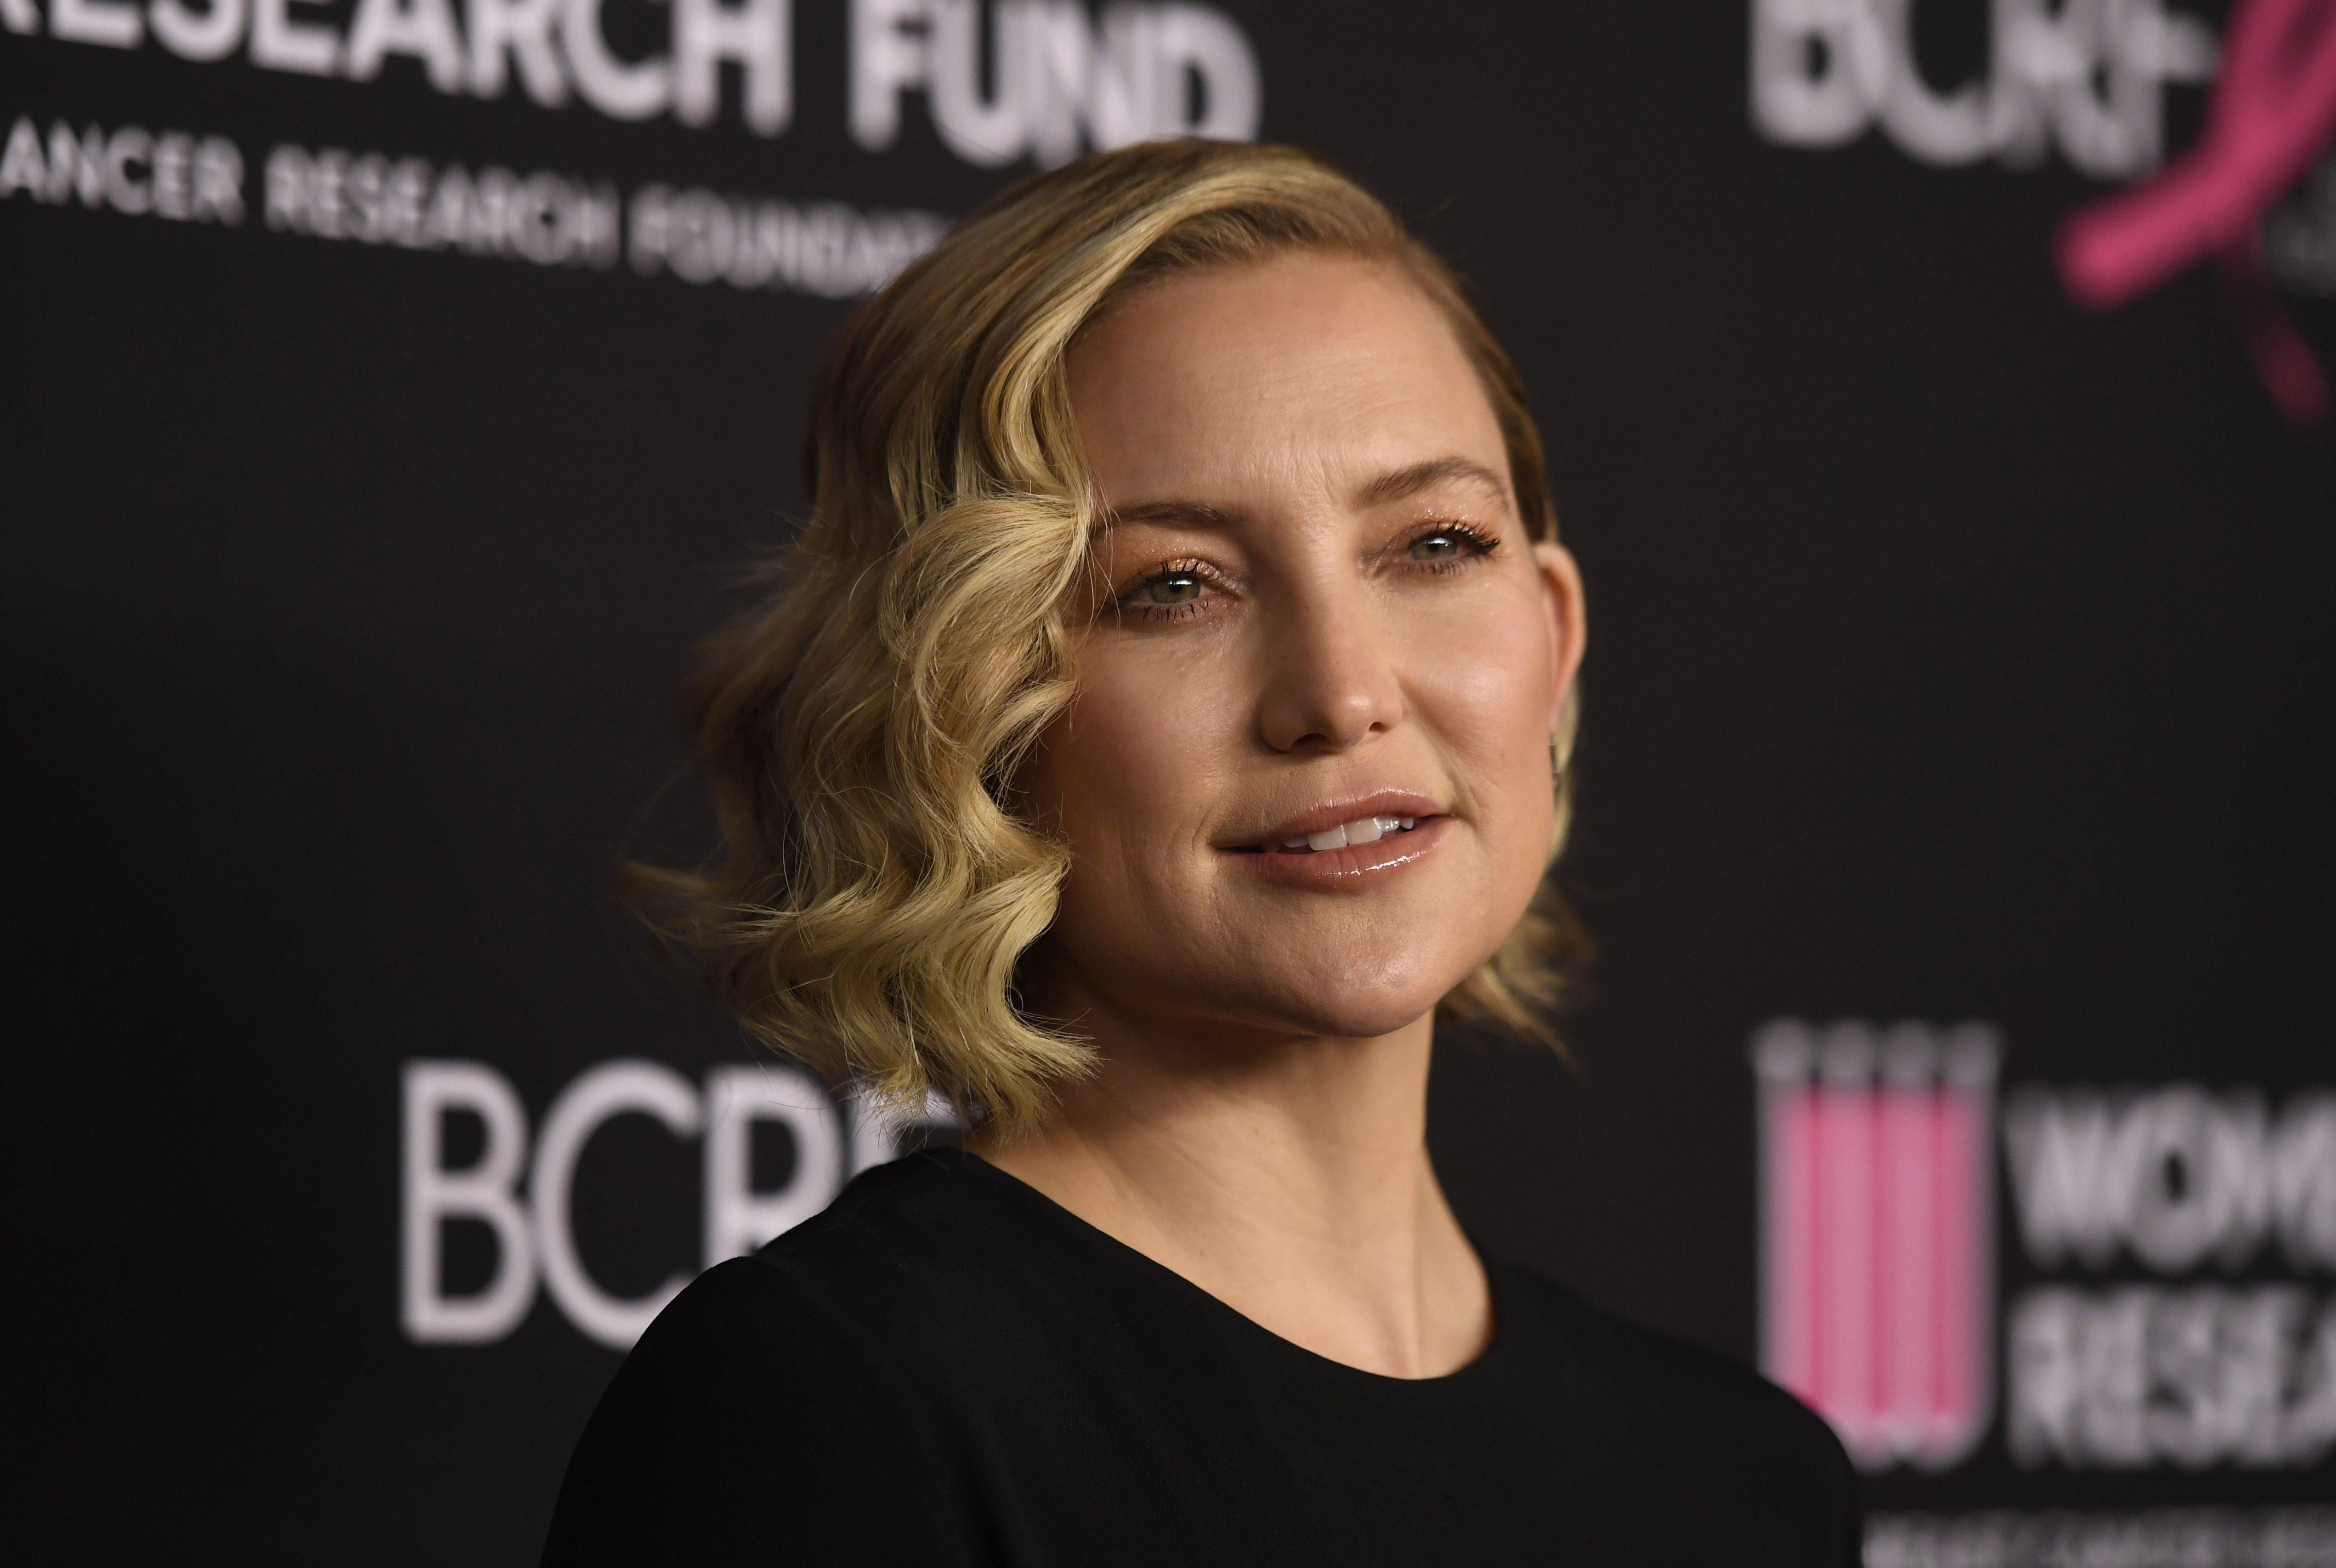 Kate Hudson at The Women's Cancer Research Fund on February 28, 2019 | Photo: Getty Images